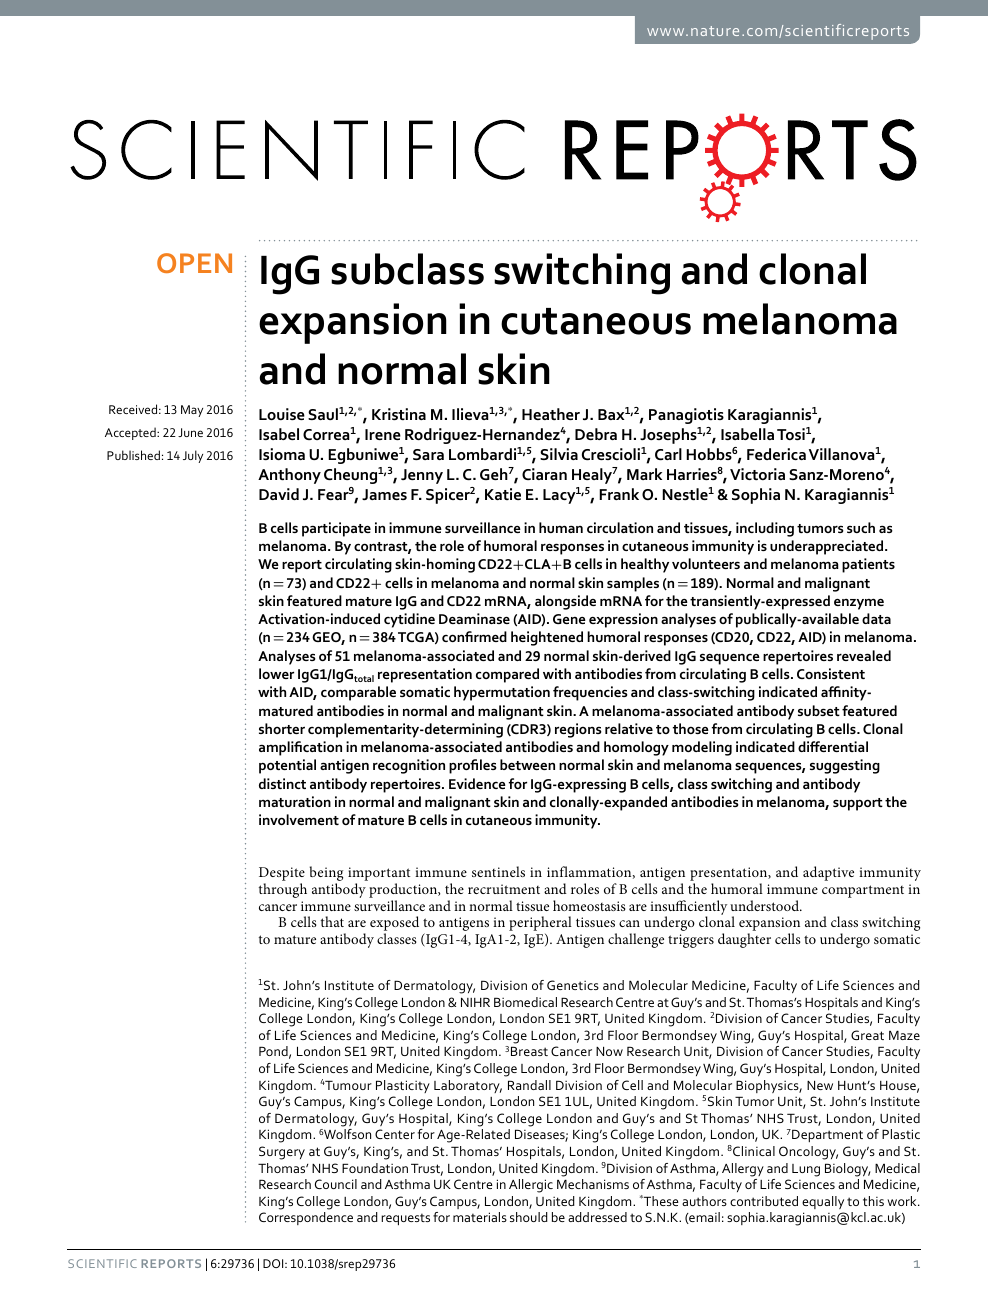 Igg Subclass Switching And Clonal Expansion In Cutaneous Melanoma And Normal Skin Topic Of Research Paper In Biological Sciences Download Scholarly Article Pdf And Read For Free On Cyberleninka Open Science